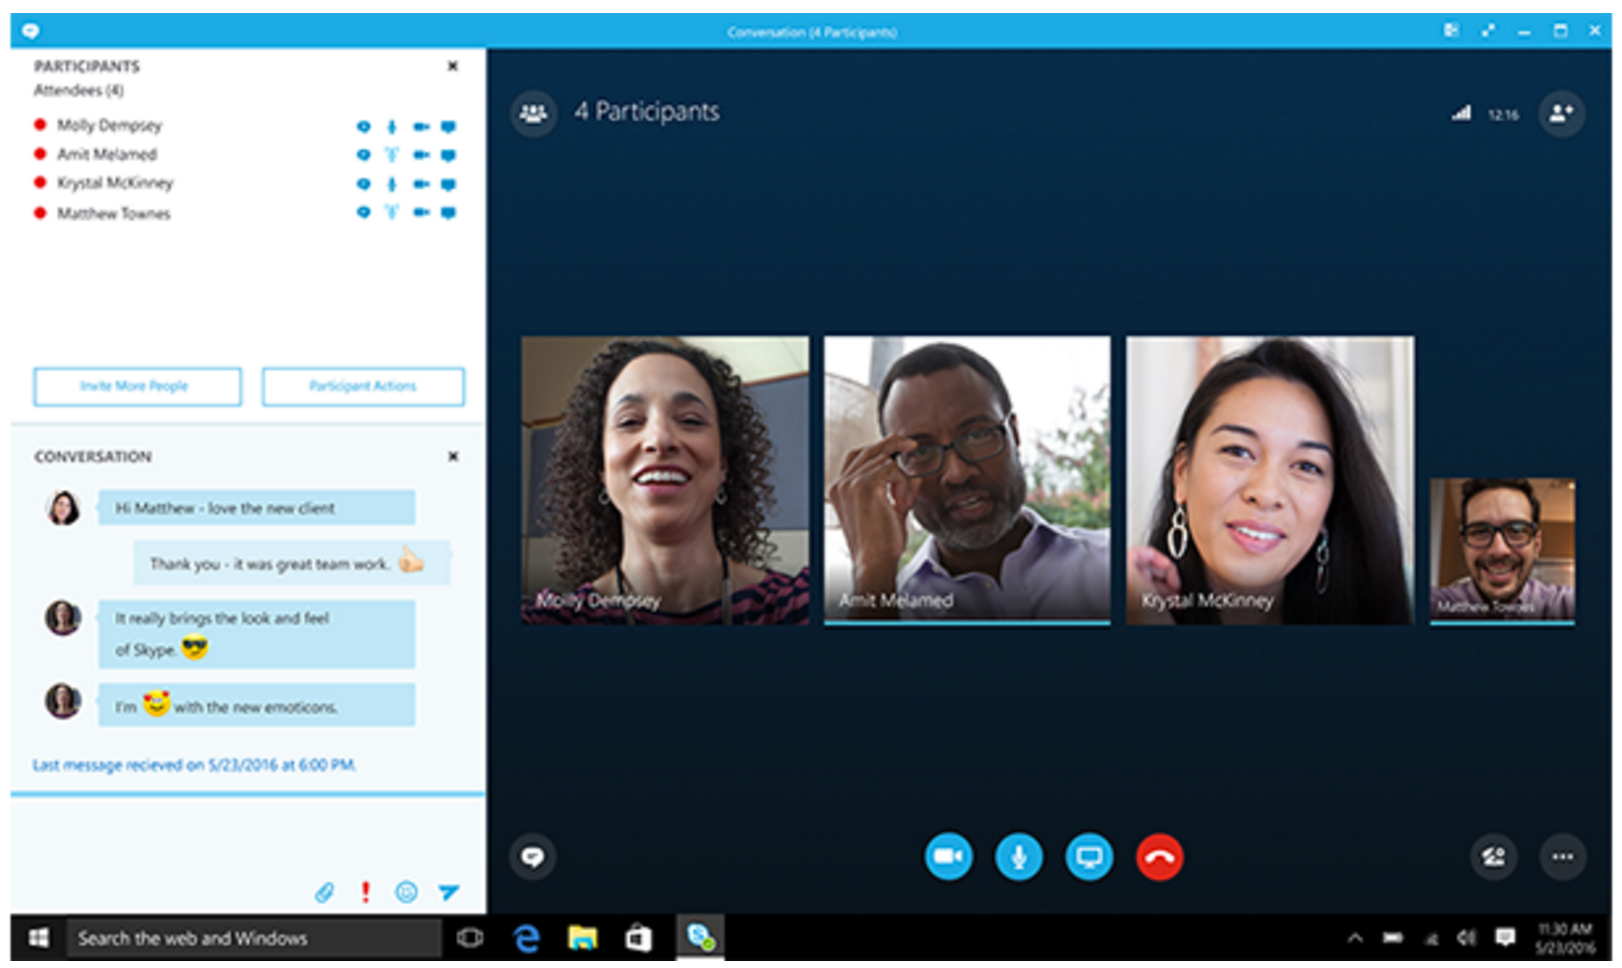 Live chat in virtual meeting